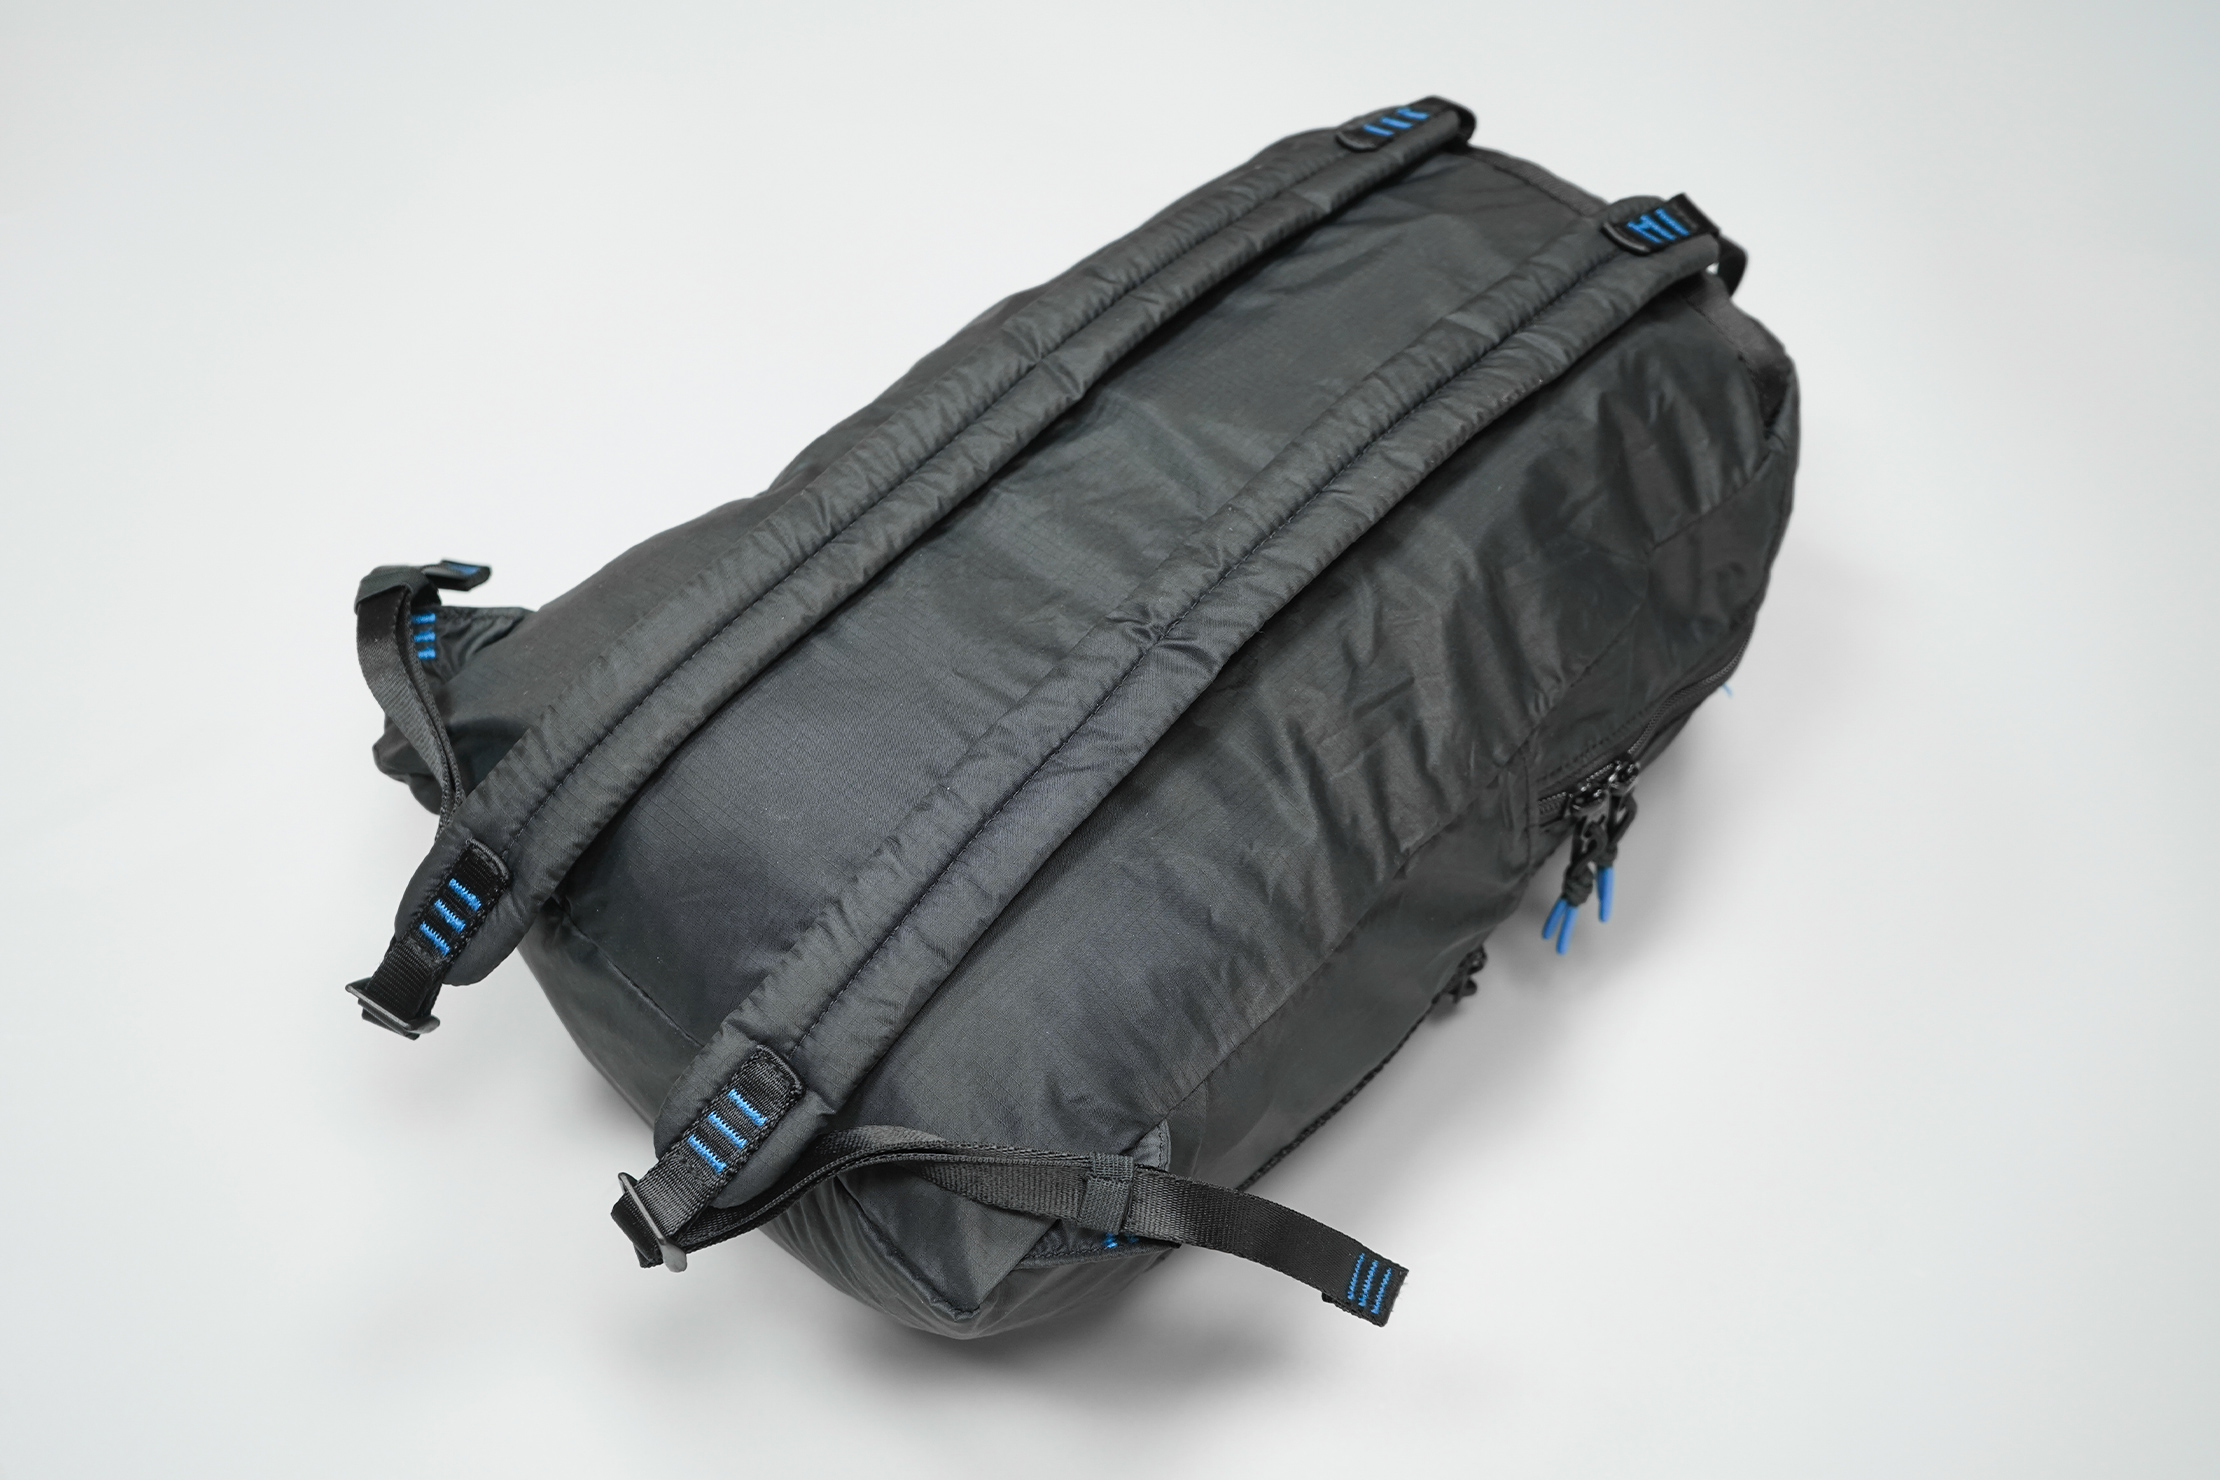 Sandqvist Erland Packable Ziptop Backpack | You don’t get a structured back panel, but the shoulder straps are still padded